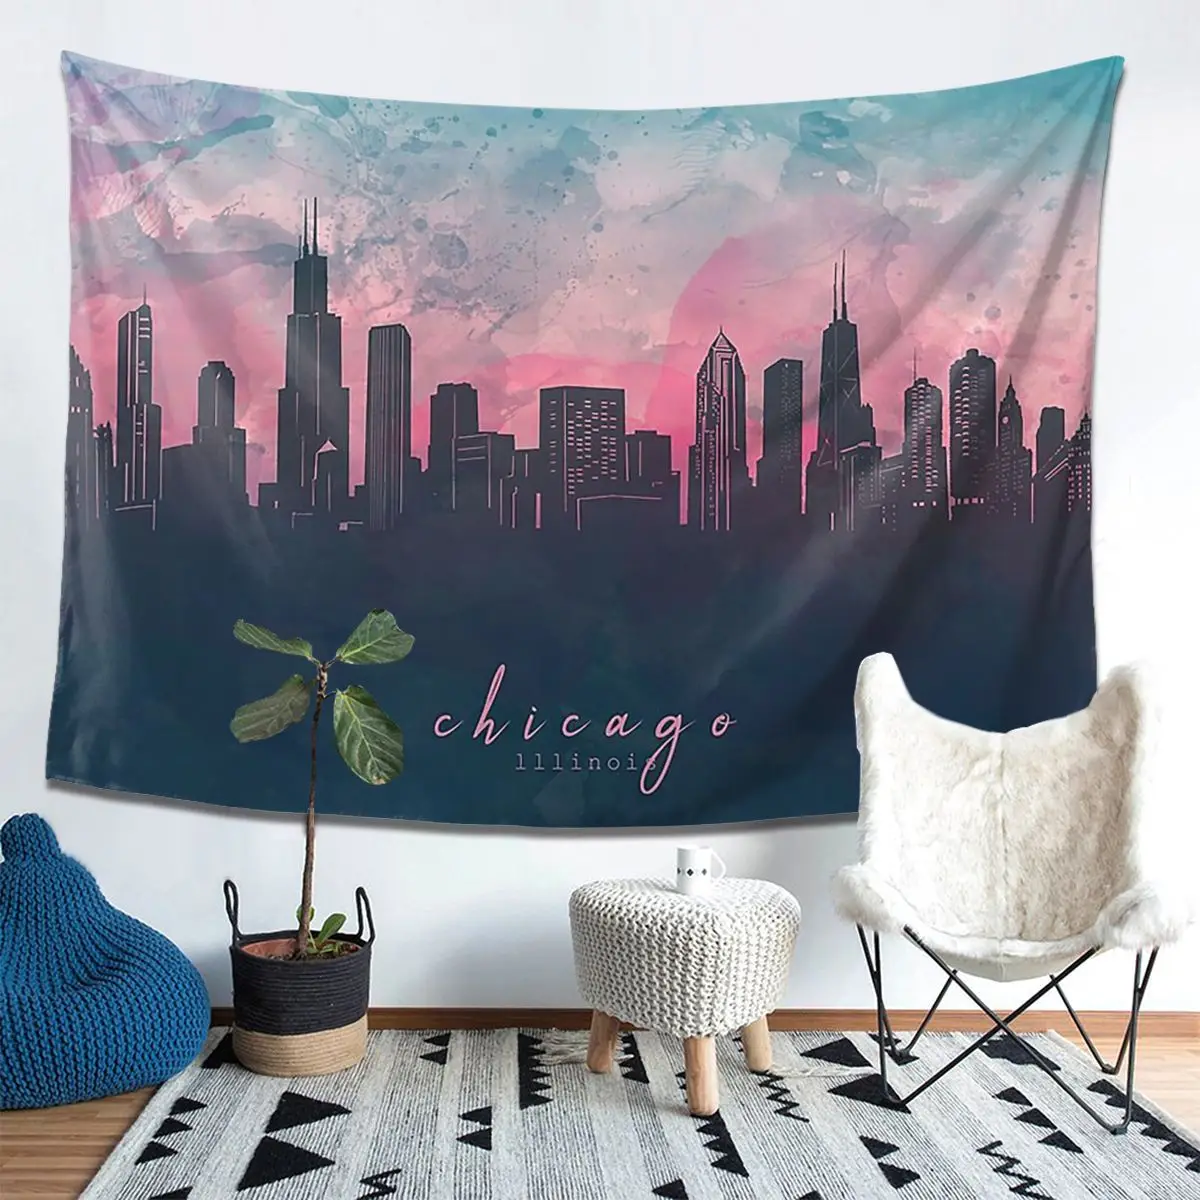 

Chicago Skyline Aesthetic Home Decor Tapestry Art Wall Hanging Tapestries on the Wall for Living Room Bedroom Dorm Room